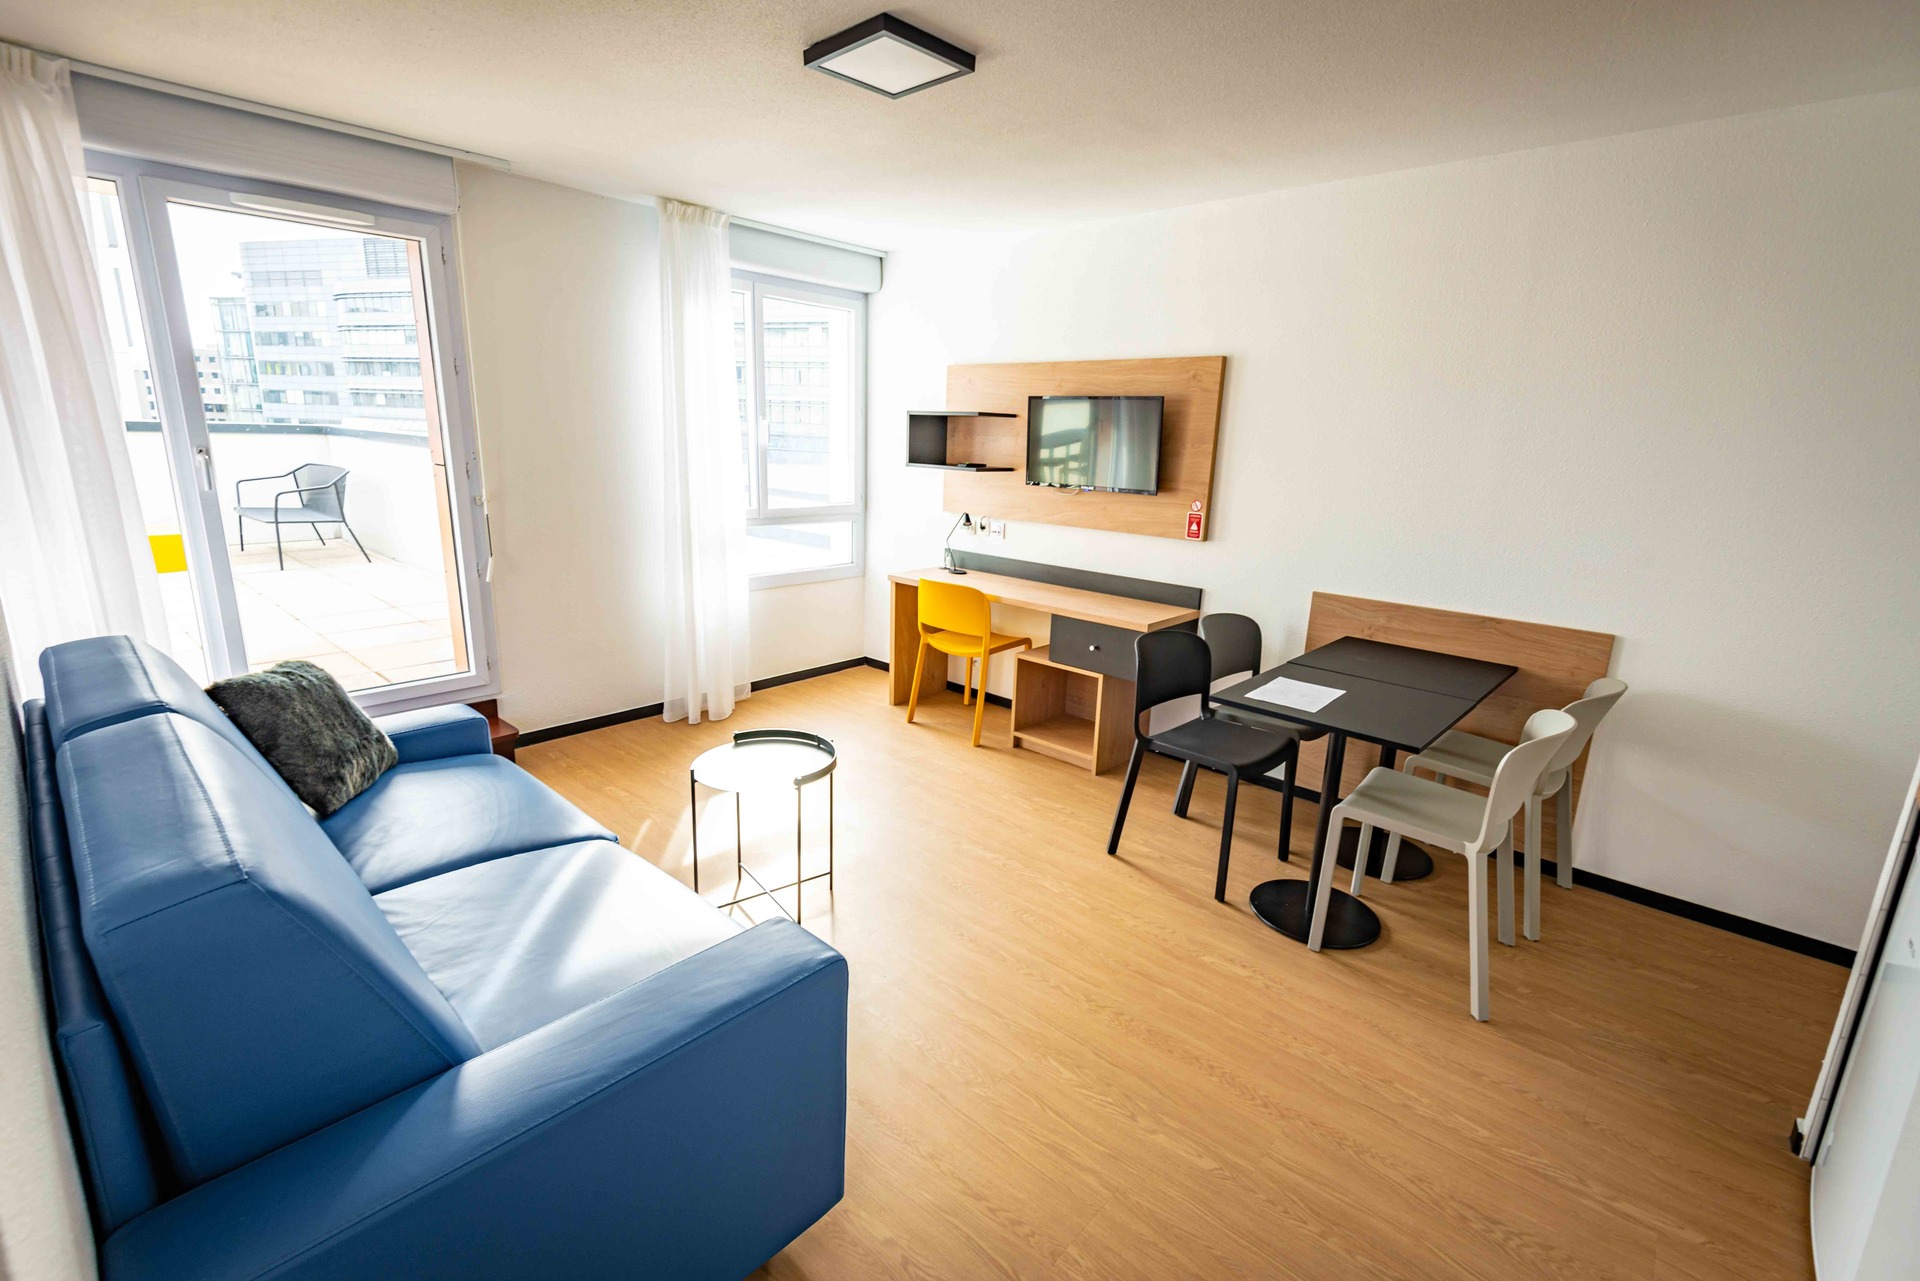 Le Hüb Grenoble - a new way of life - Coliving - Bar - Events